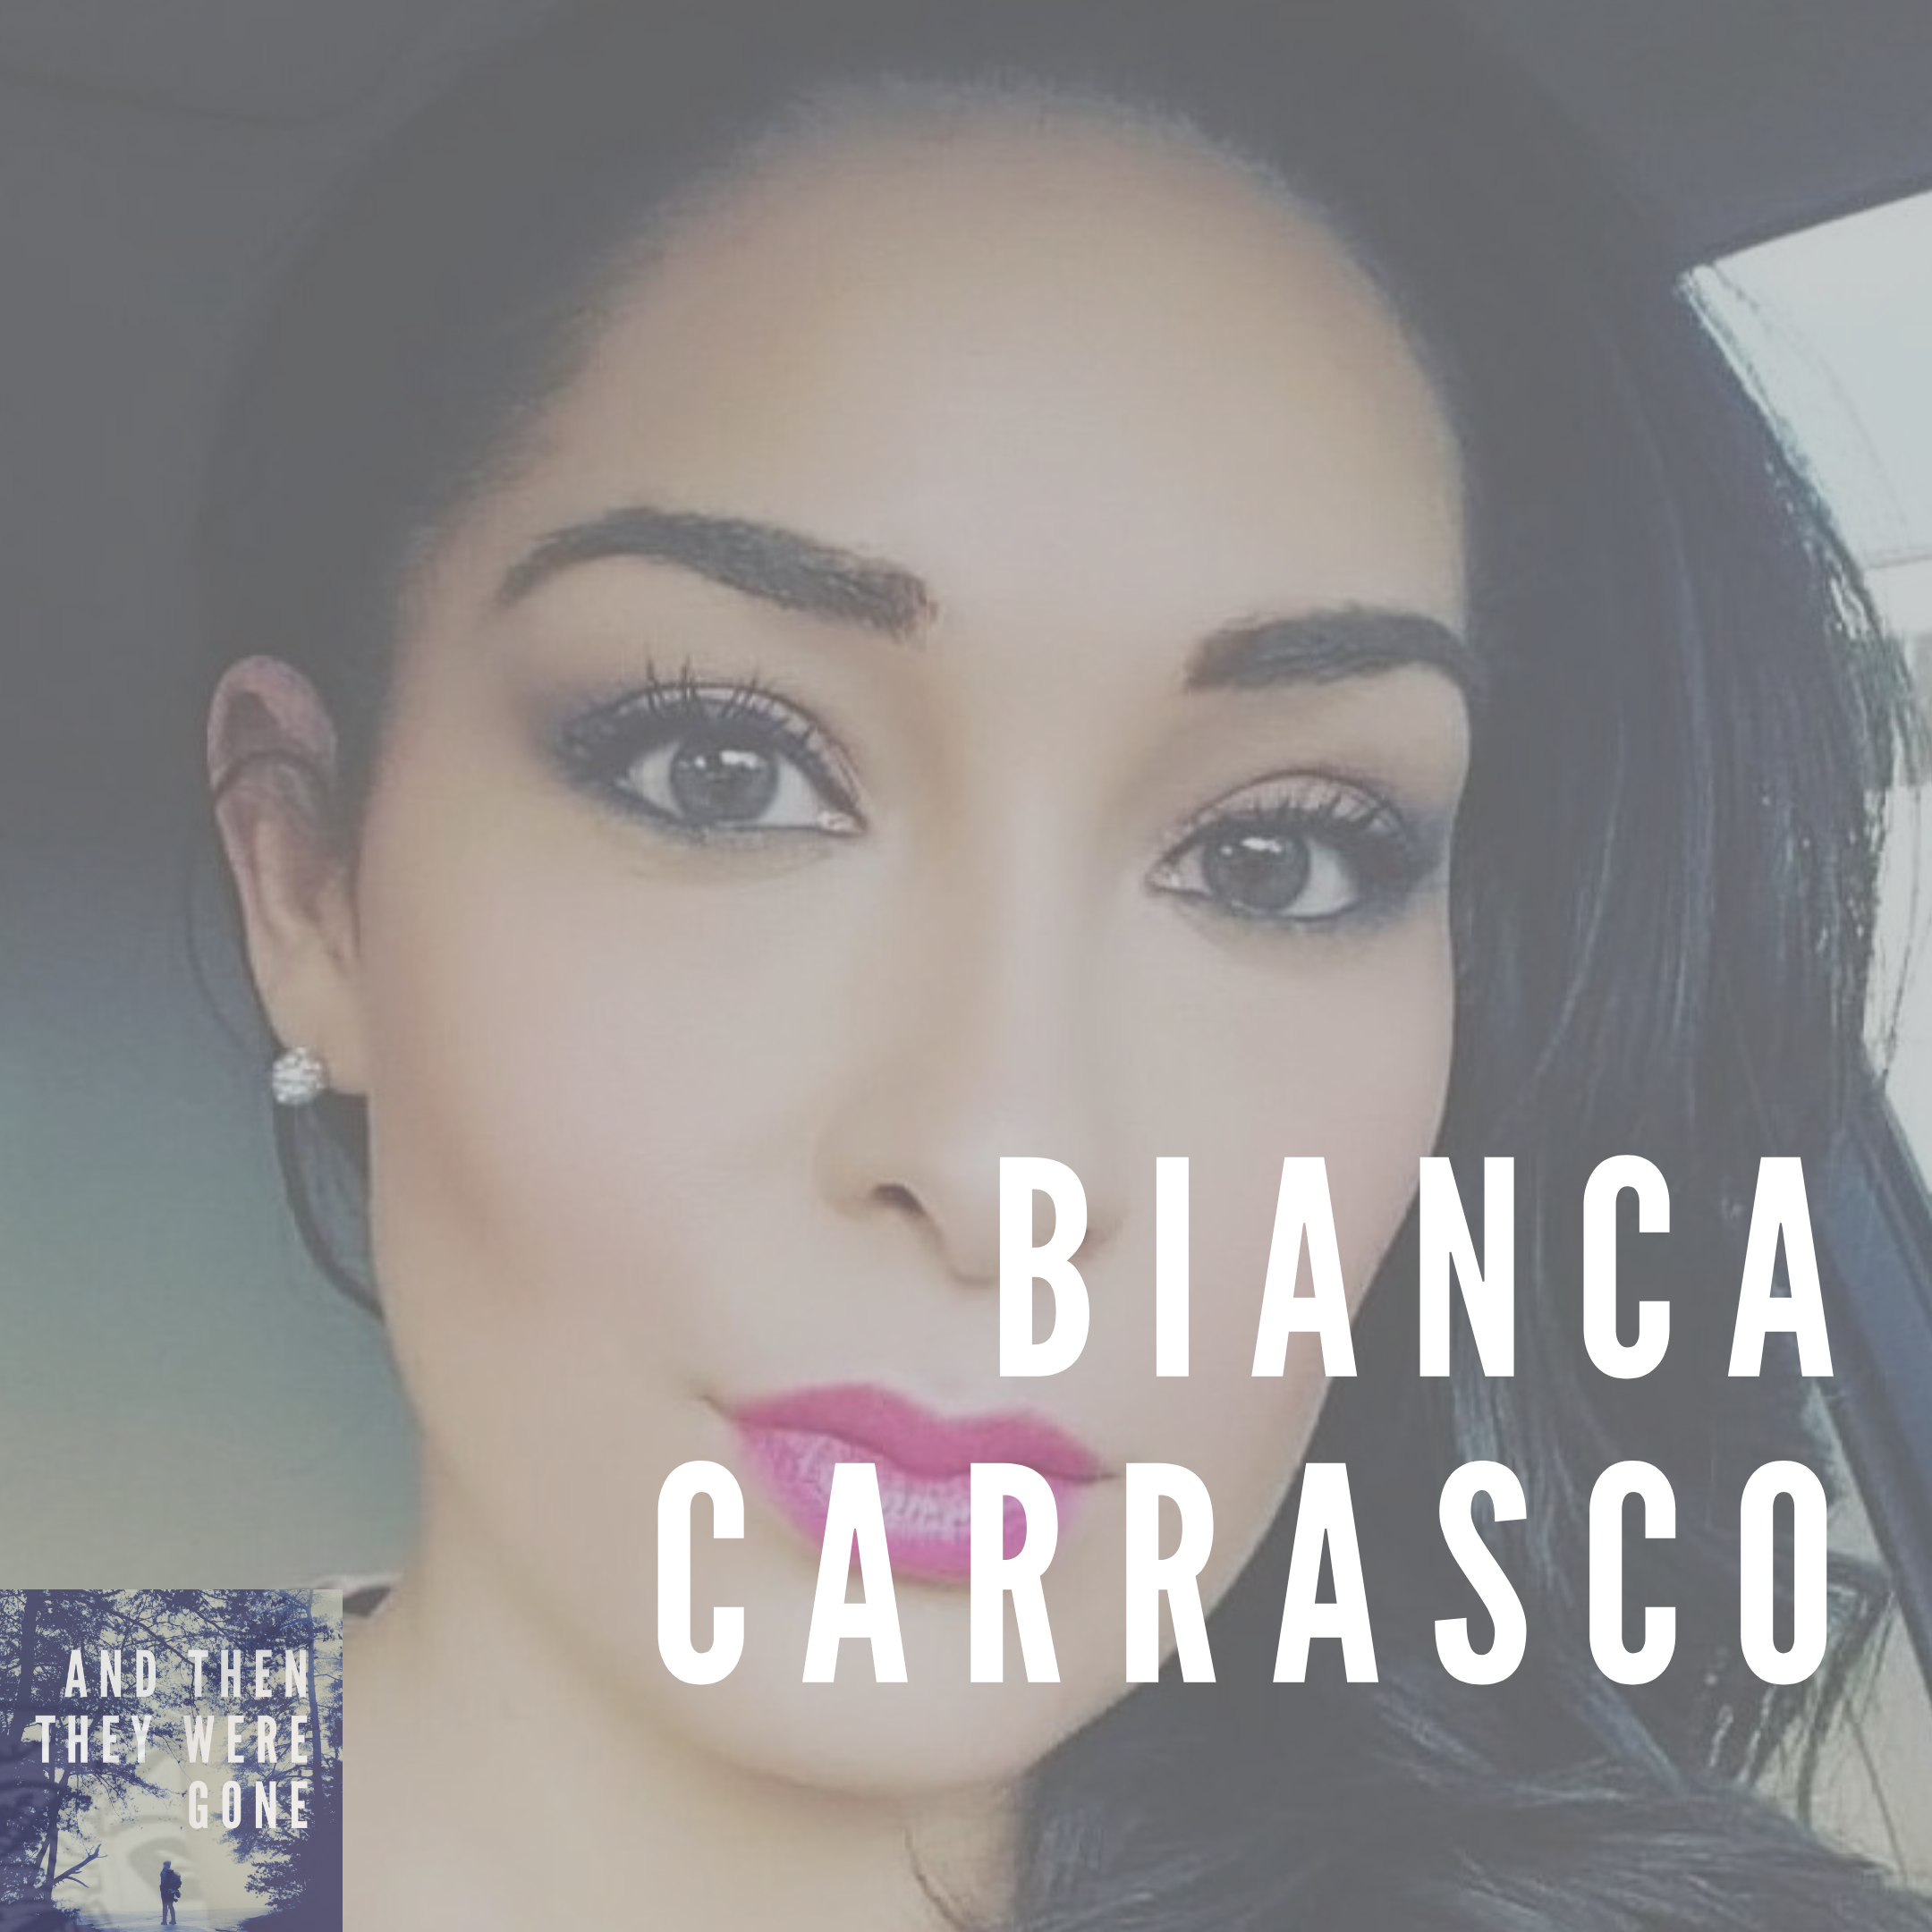 Bianca Zannette Carrasco: Missing since May 1, 2016